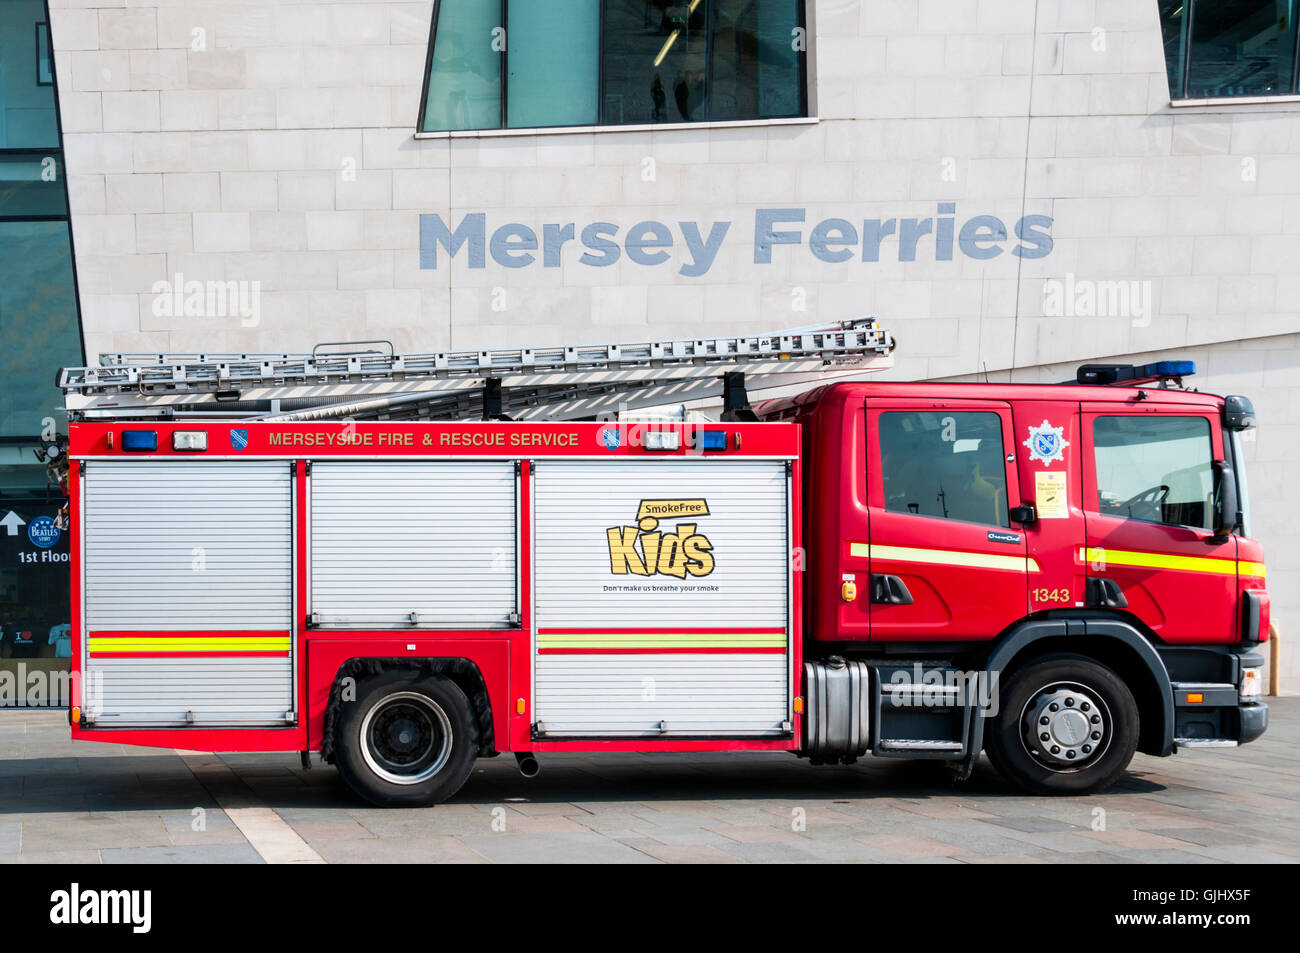 A Merseyside Fire & Rescue Service vehicle outside the Mersey Ferries building on Liverpool Pier Head. Stock Photo